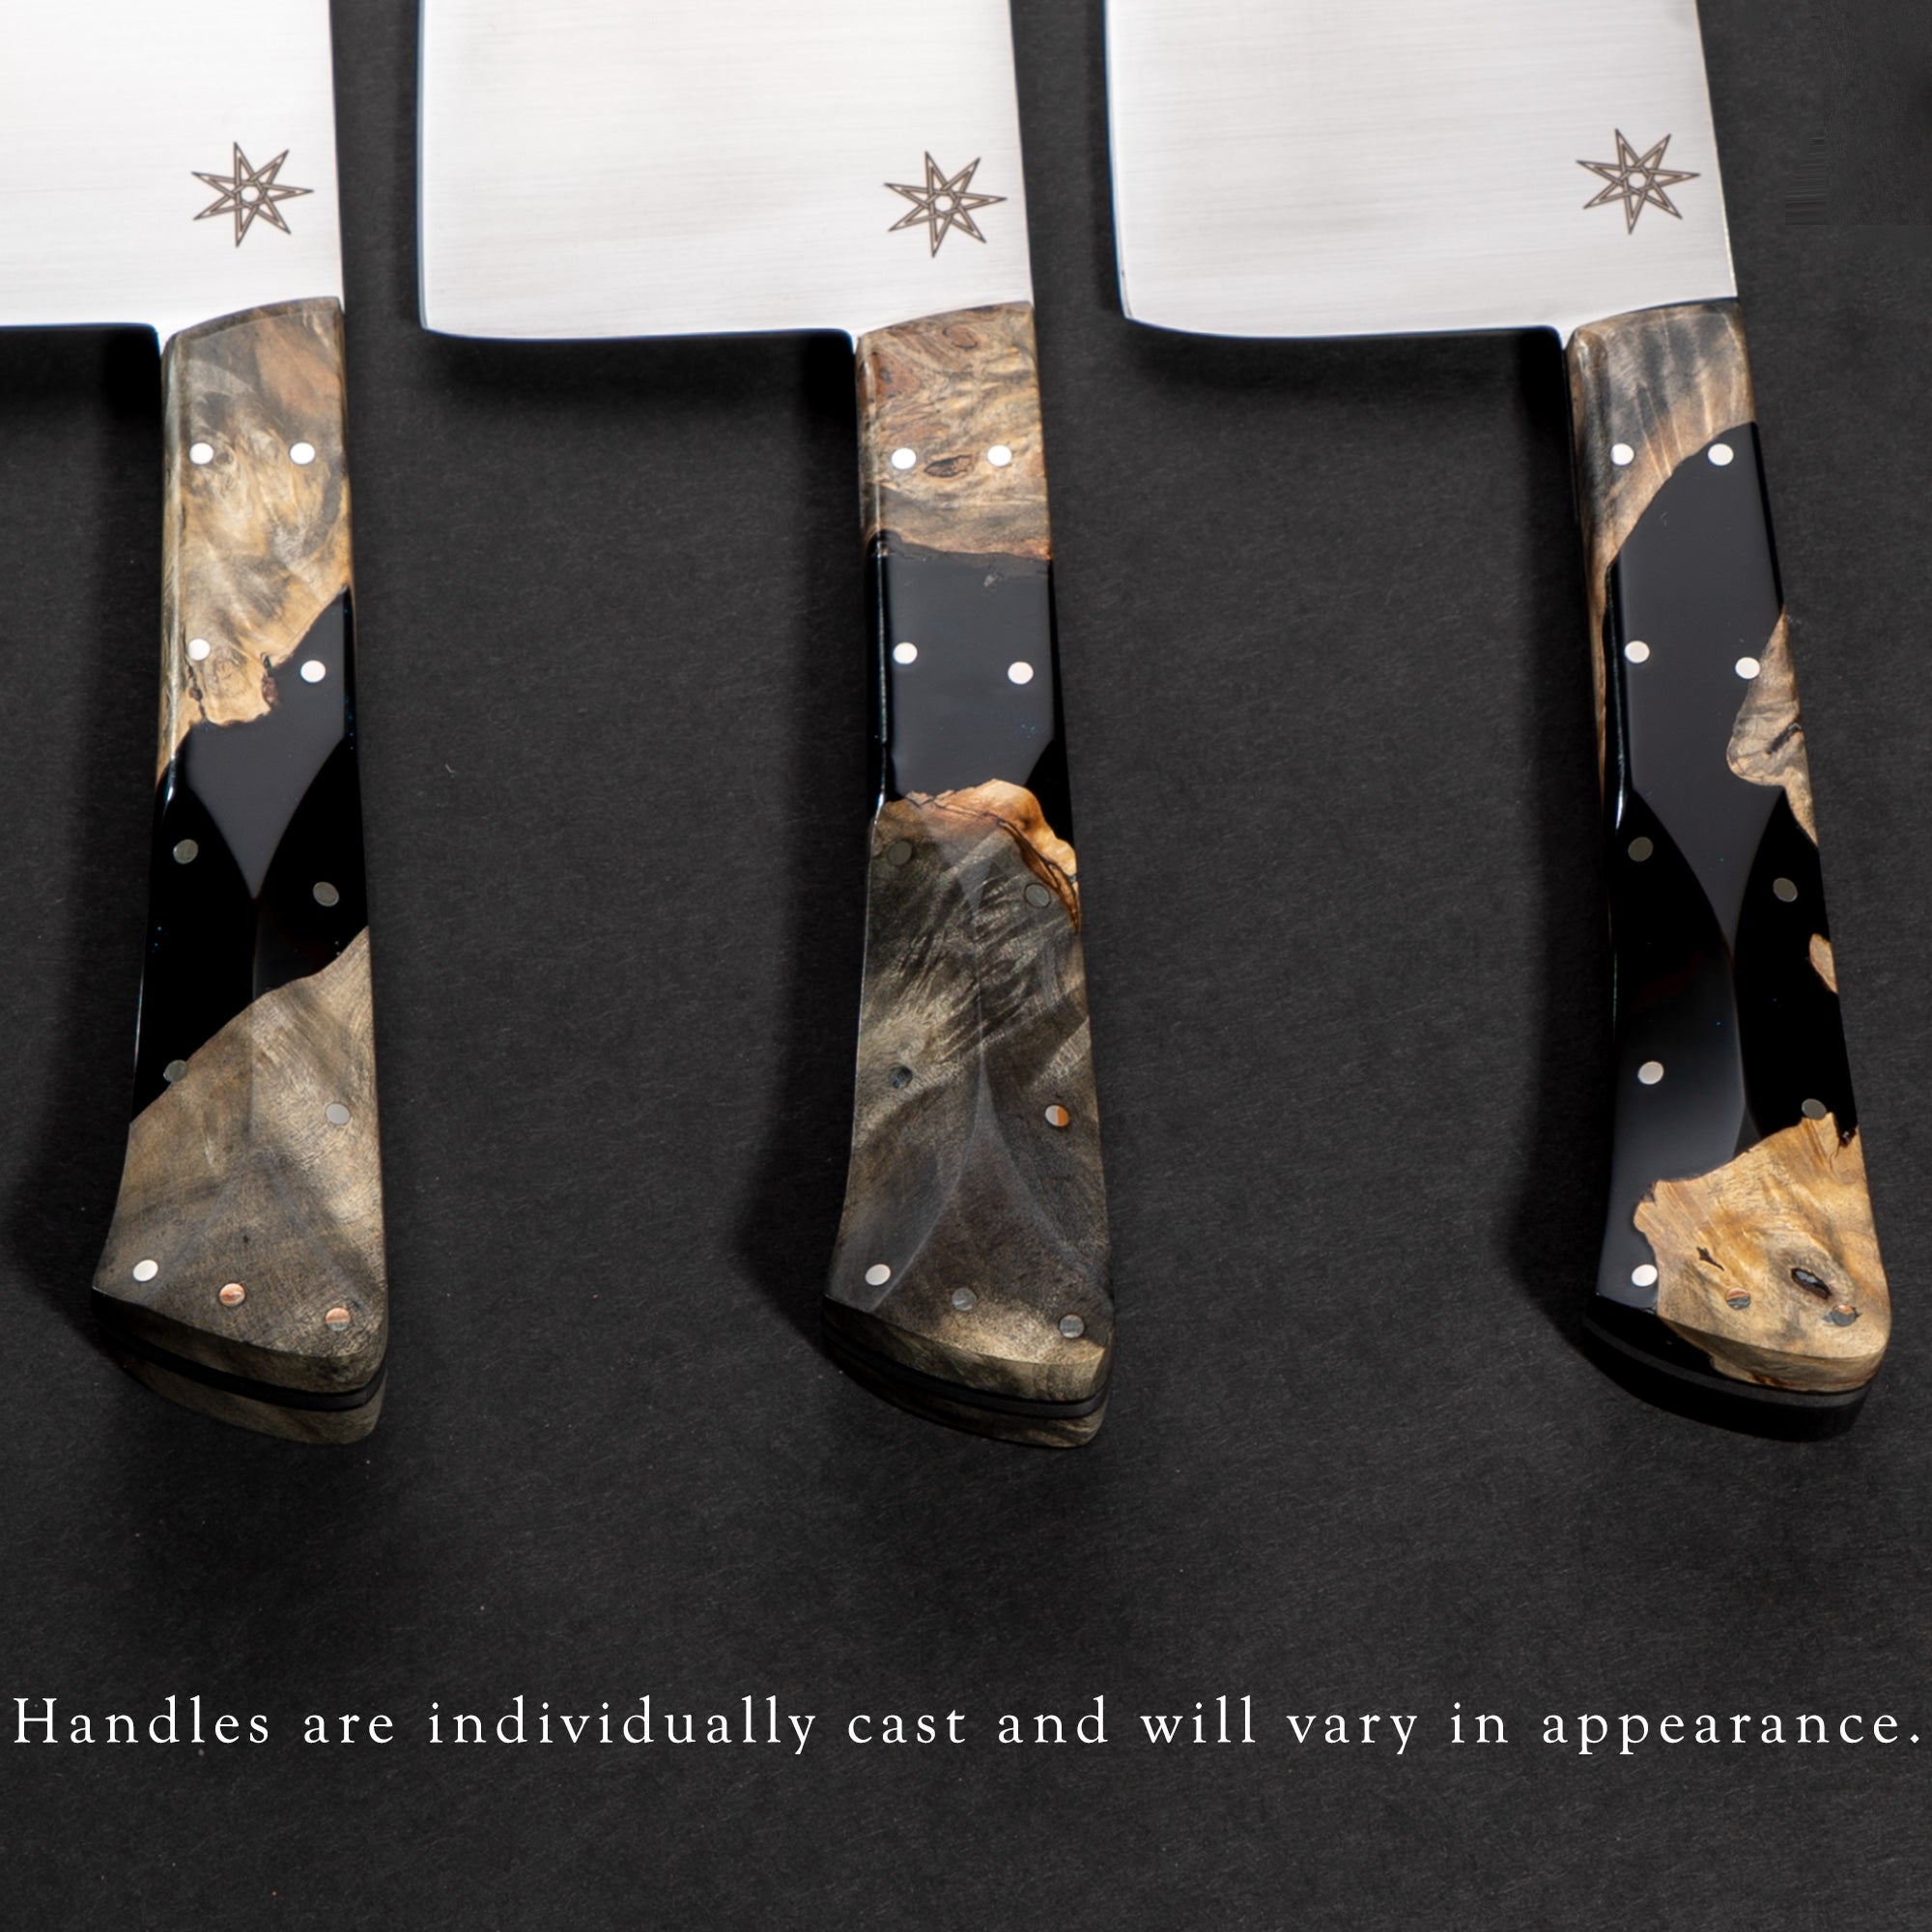 Desert Dawn handles are individually cast pieces of live edge Buckeye Burl and will vary in appearance.